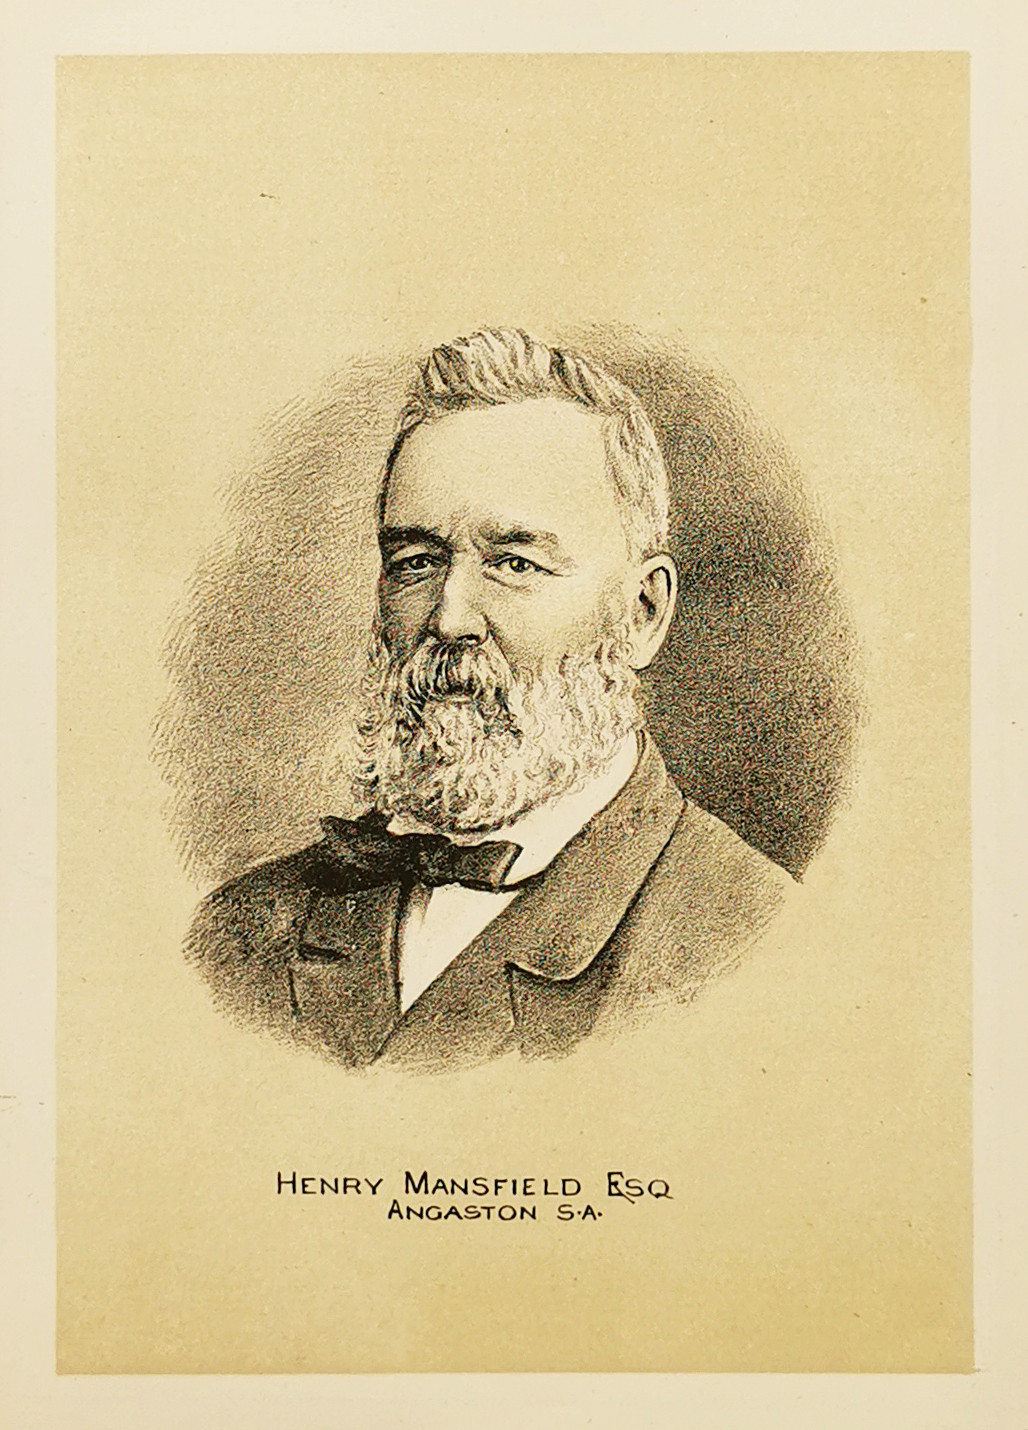 Henry Mansfield Esq. Angaston S.A. - Antique Print from 1889